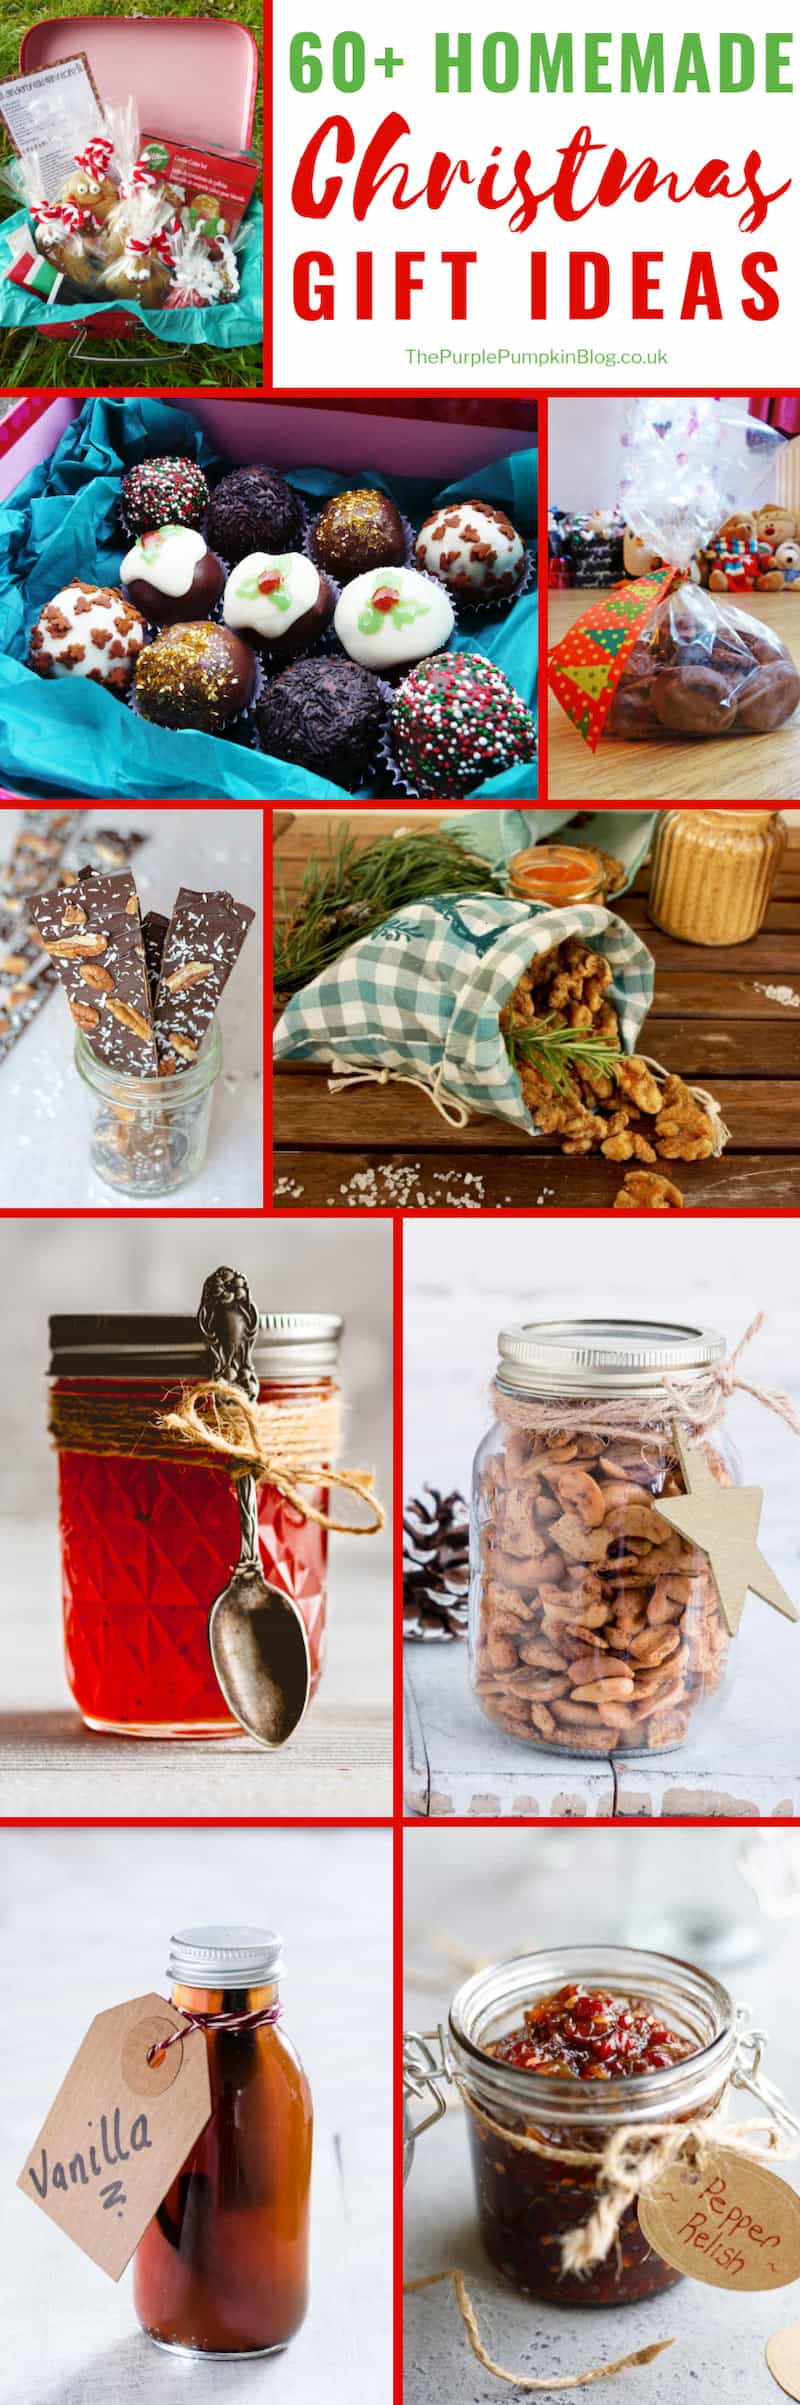 60+ Homemade Christmas Gifts that are perfect if you want to add a personal touch to your Christmas gifting. Included in this list of ideas and inspiration for homemade Christmas gifts are recipes which you can package into gift baskets, as well as homemade pamper products, sewing, and crochet projects, and more!